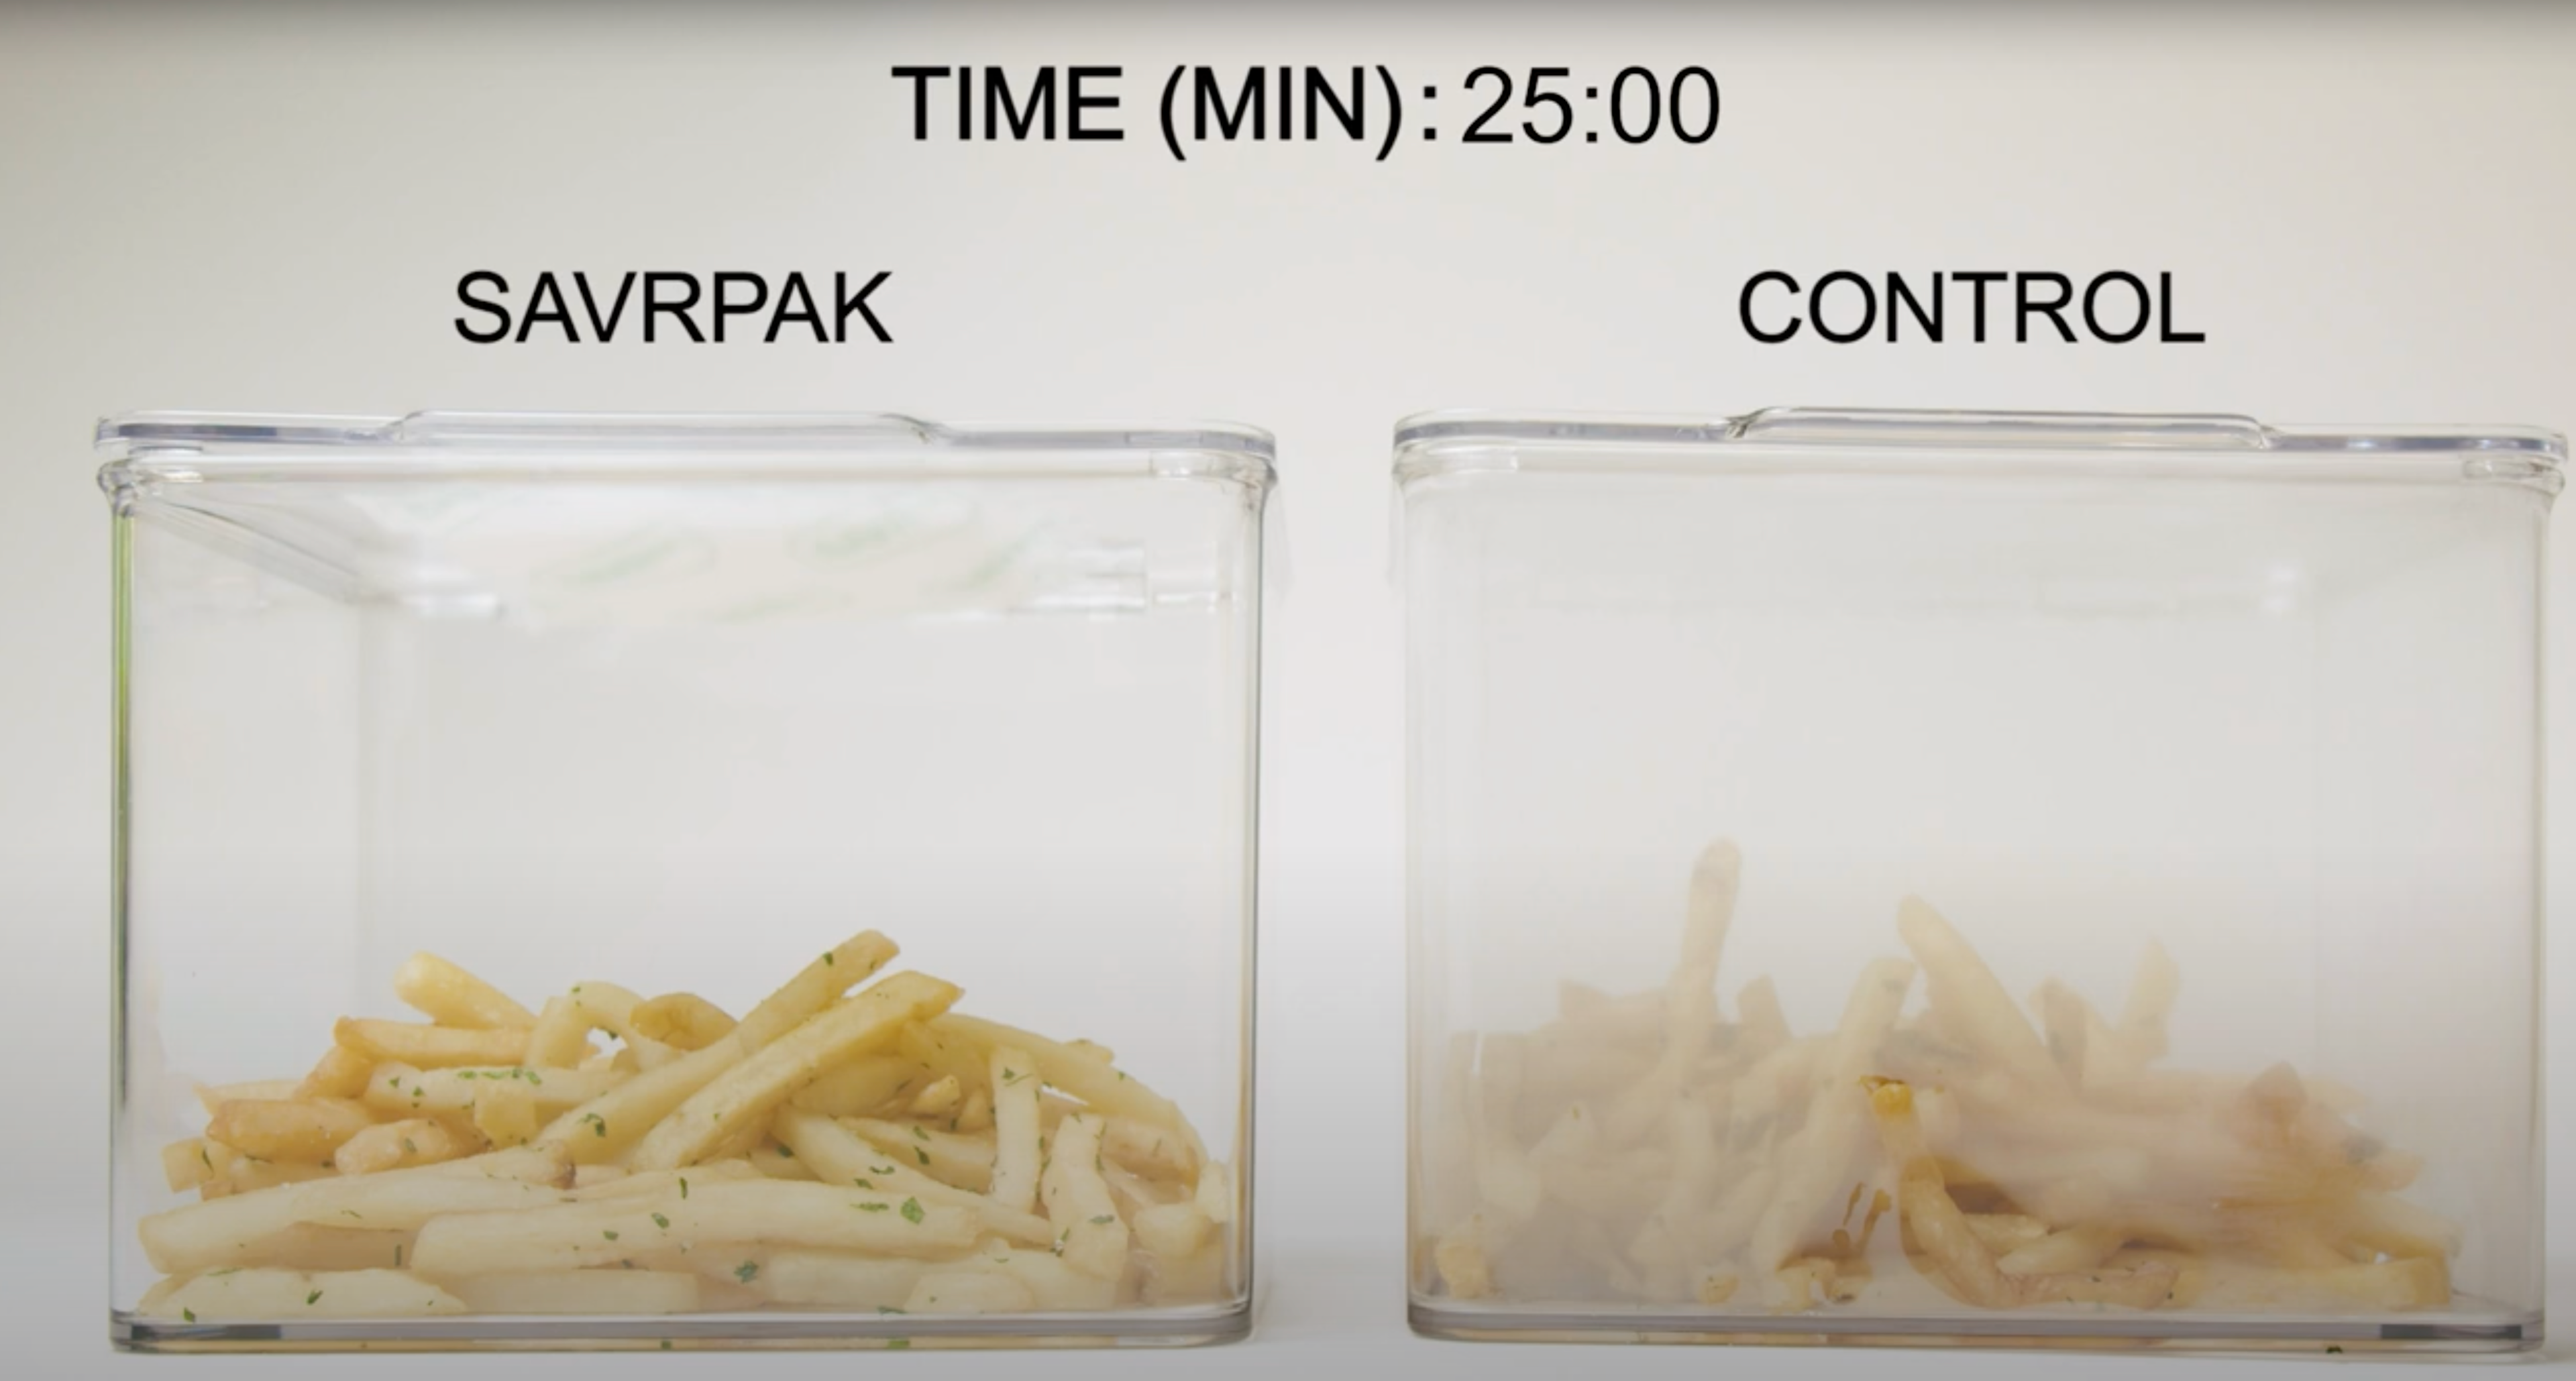 A still from a SAVRPak demo video shows that, after 25 minutes, one clear container containing french fries and fitted with a SAVRPak pad is clear, while another clear container containing fries and no SAVRPak pad is all fogged up.  